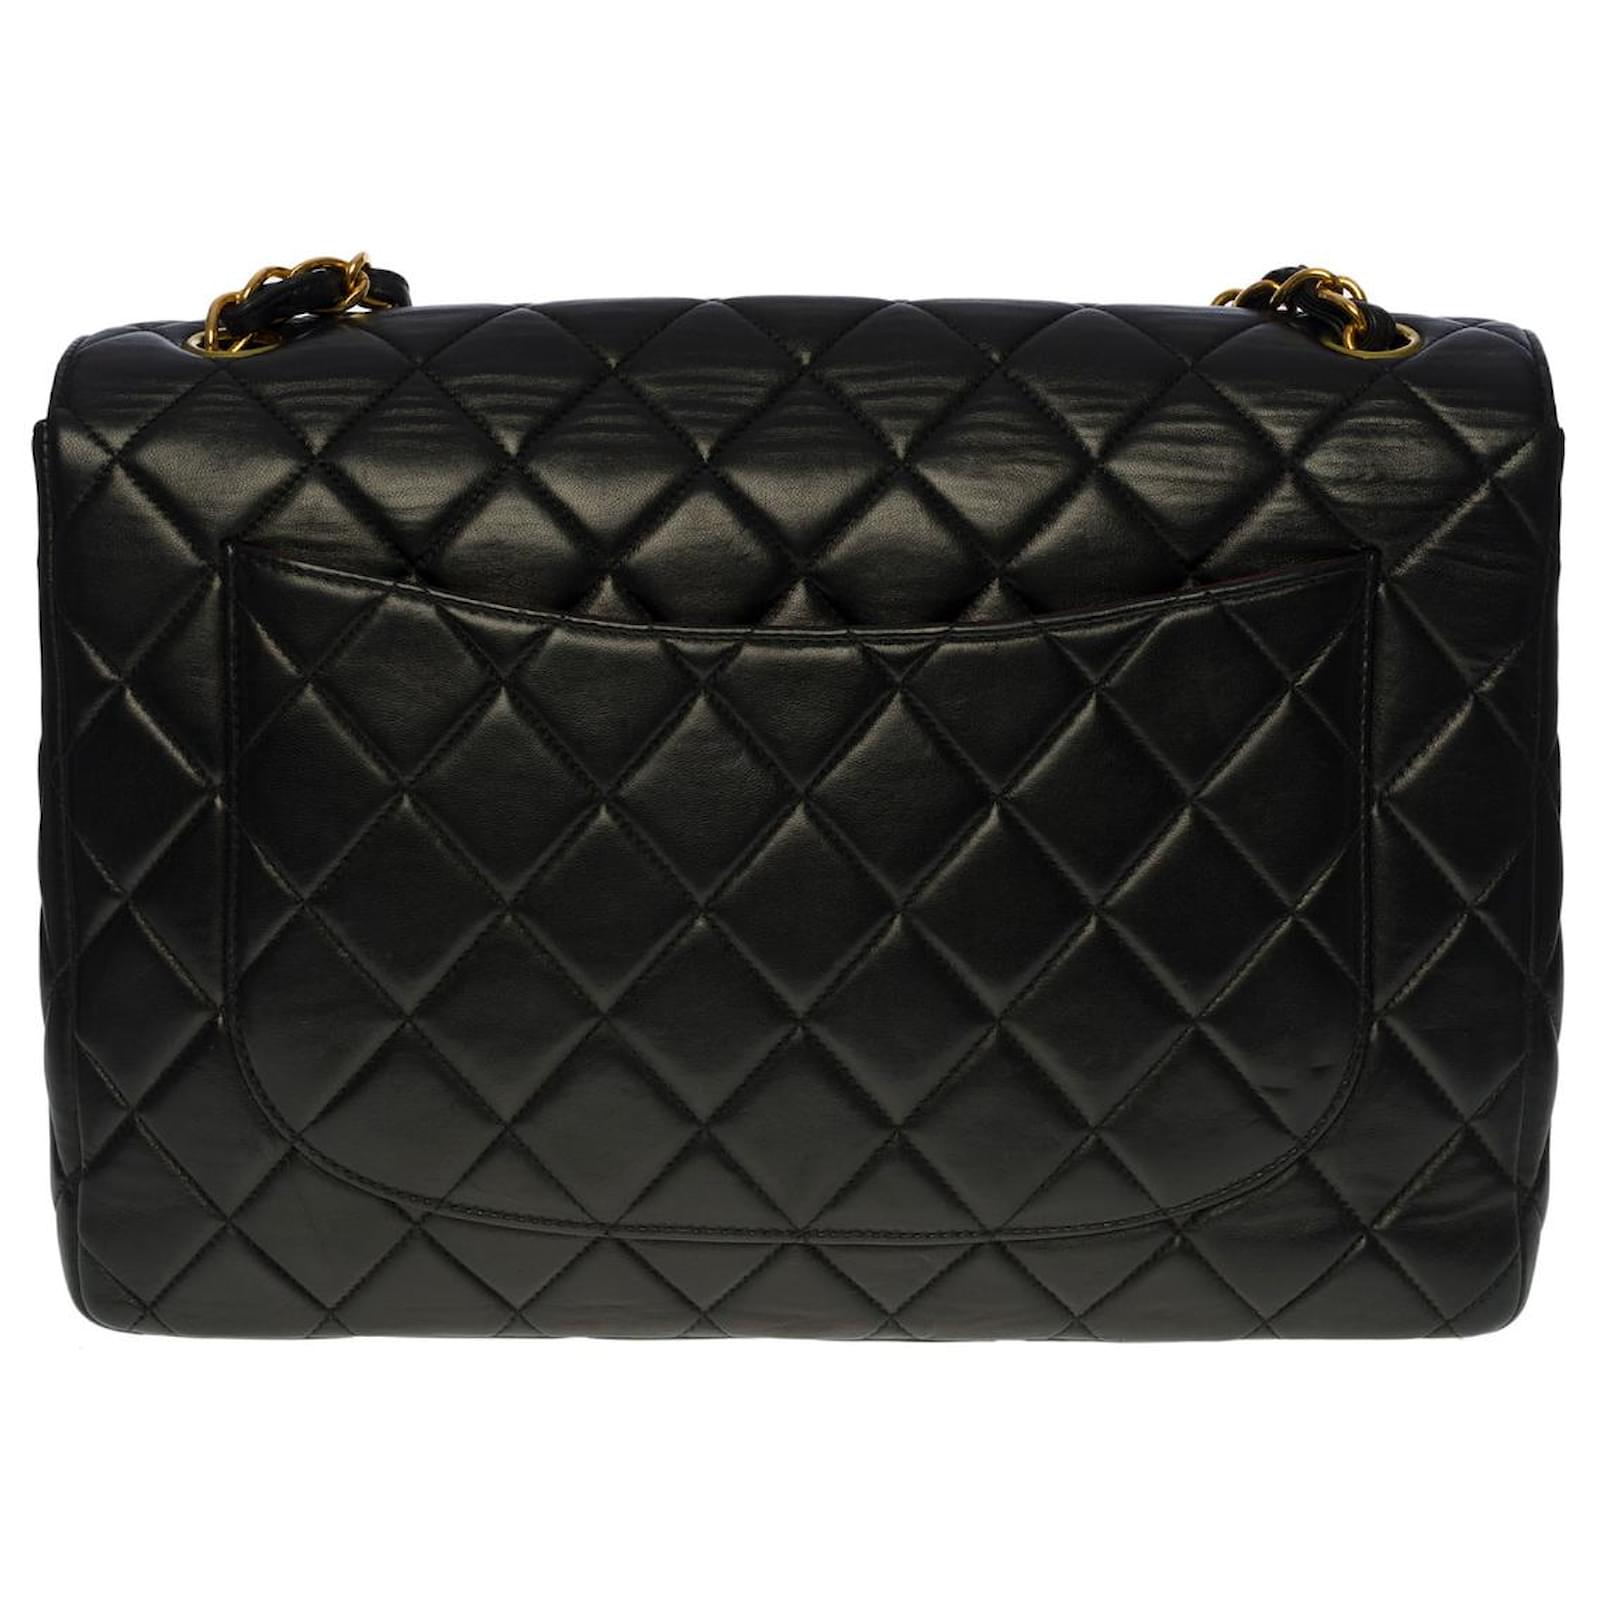 Chanel Paris Quilted Lamb Skin Black Caviar Large Logo Bag Made In Italy